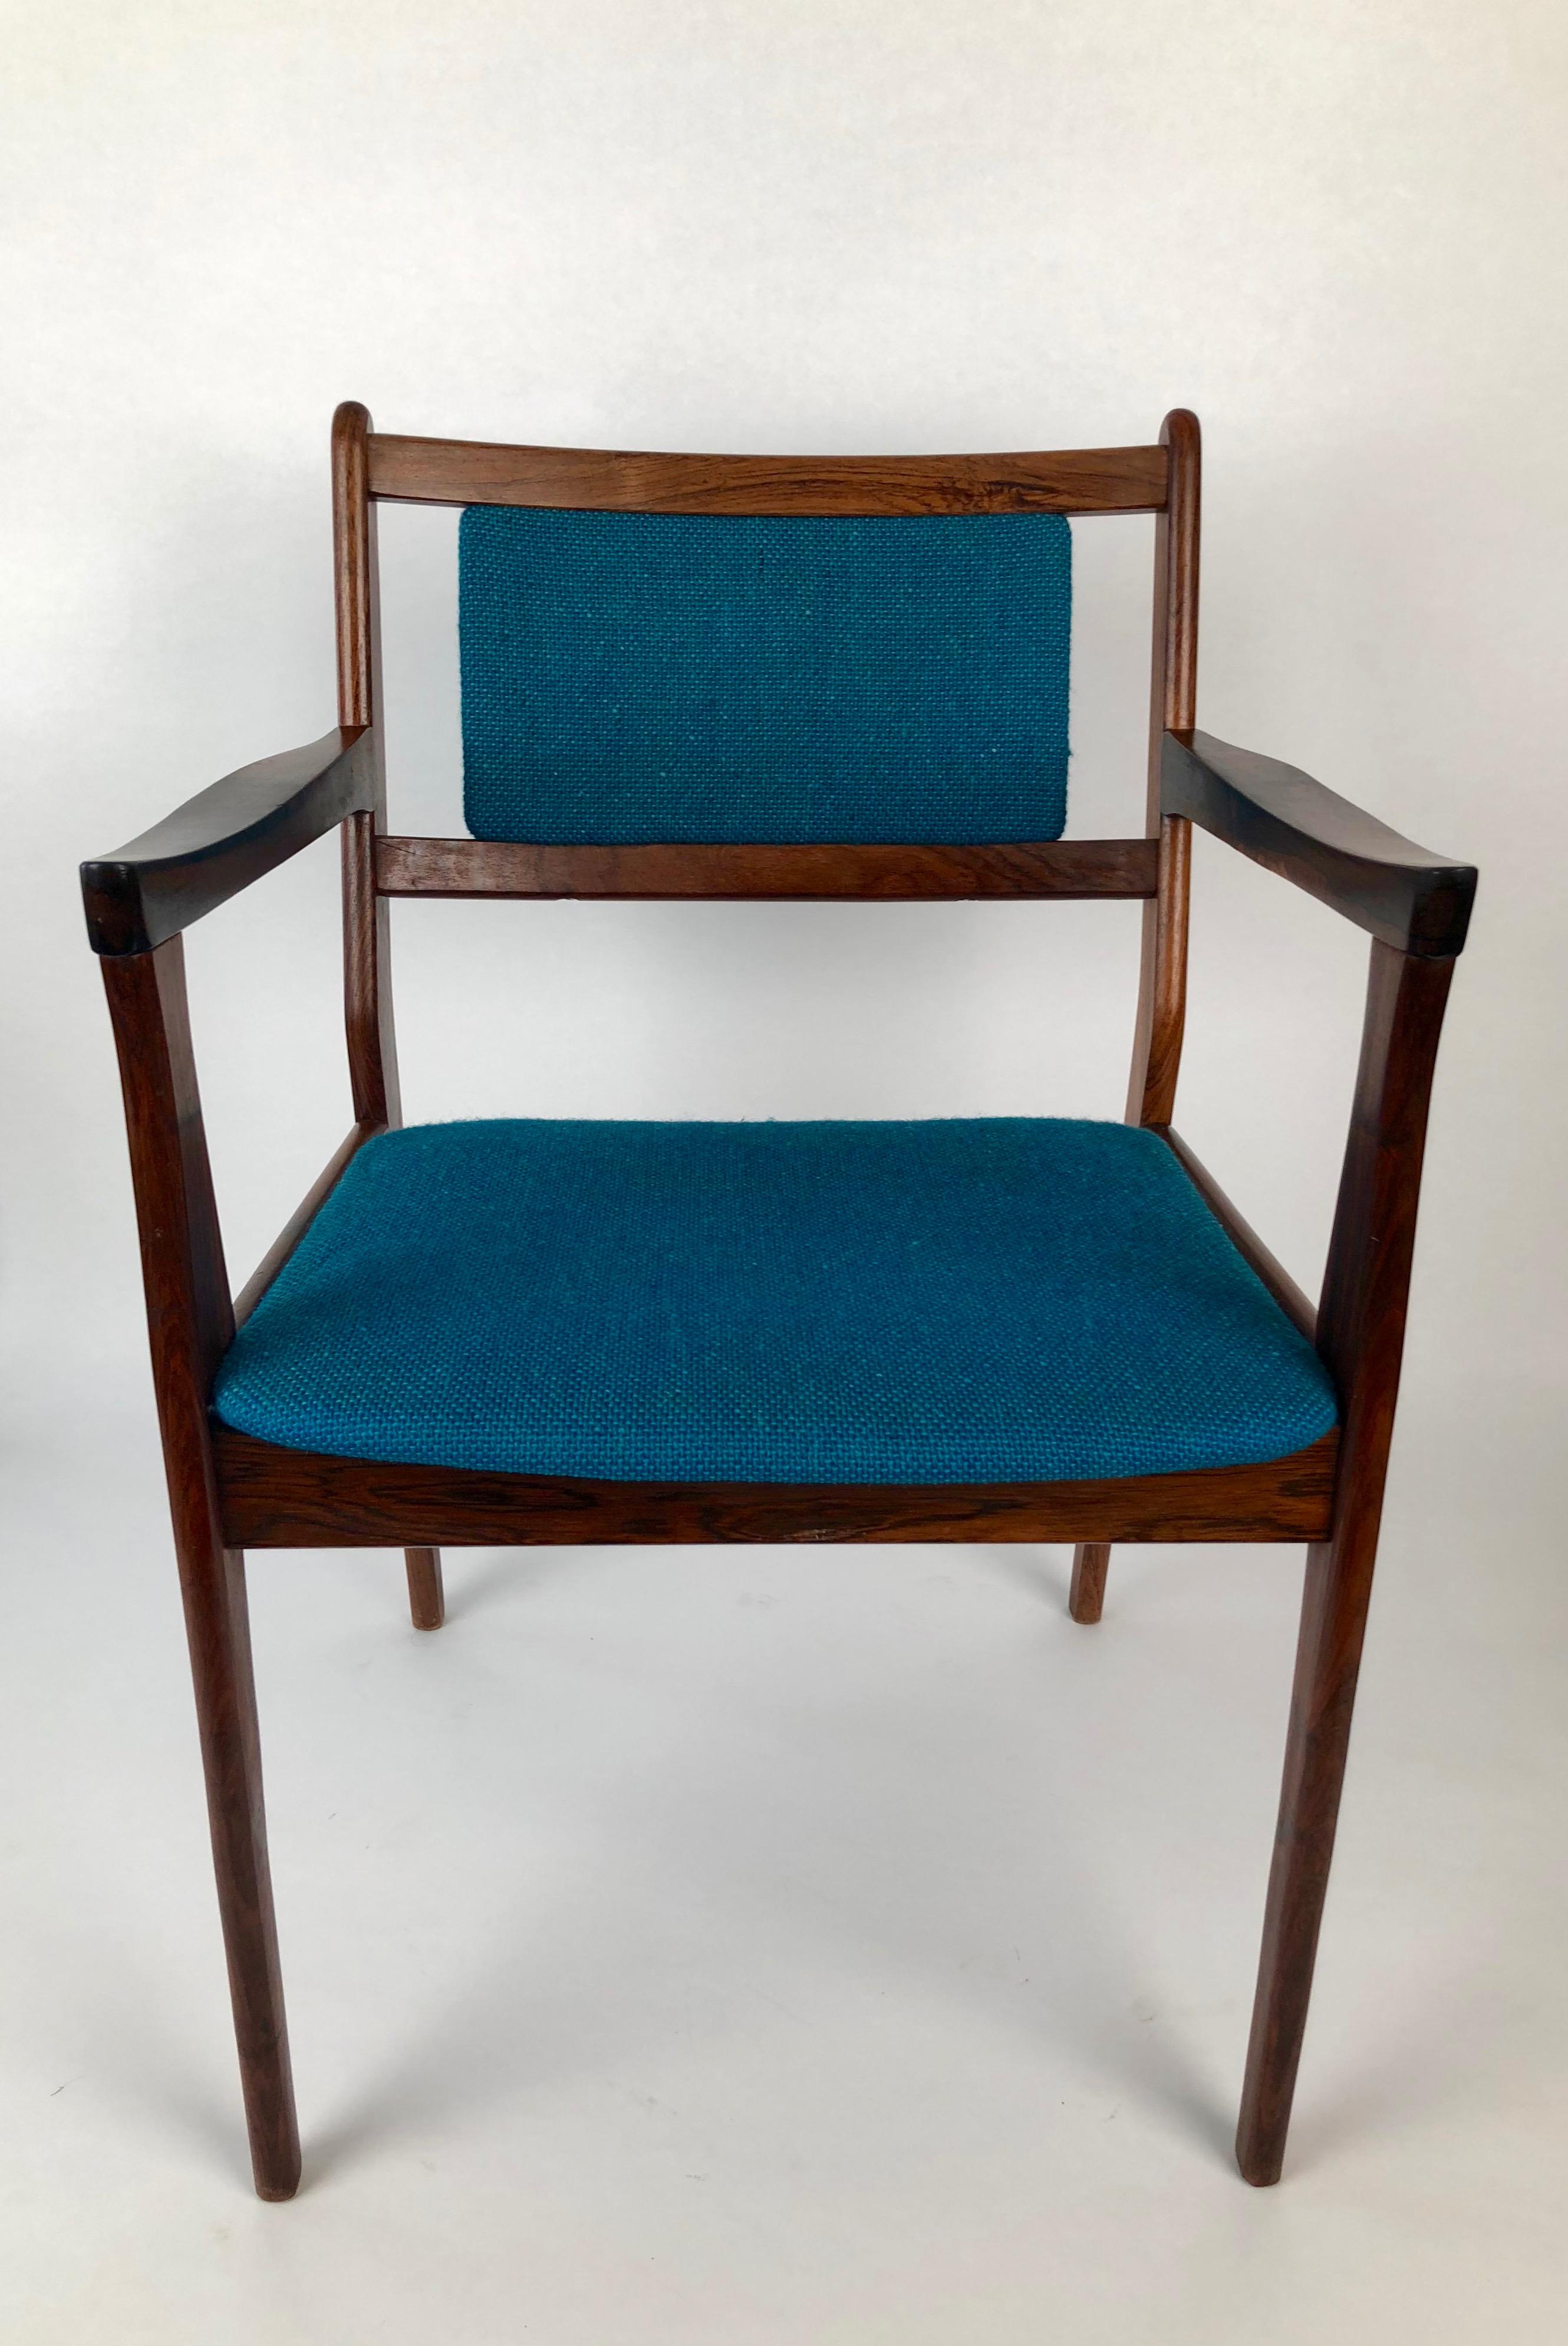 Set of Two Palisander Chairs with Turquoise Fabric from the 1960s For Sale 2